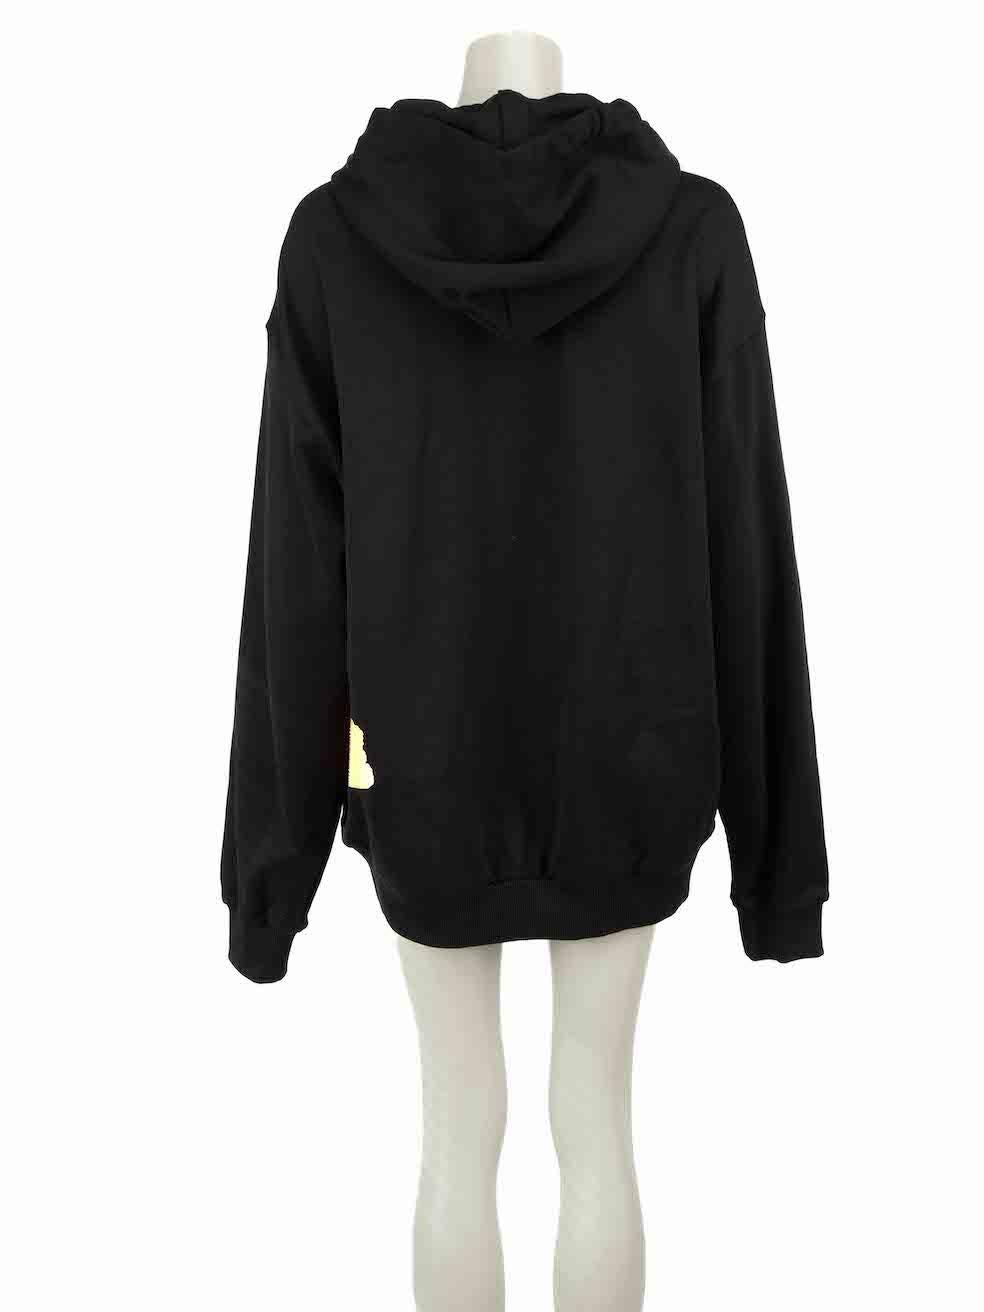 Dolce & Gabbana Black Gold Realta Parallela Graphic Hoodie Size M In New Condition For Sale In London, GB